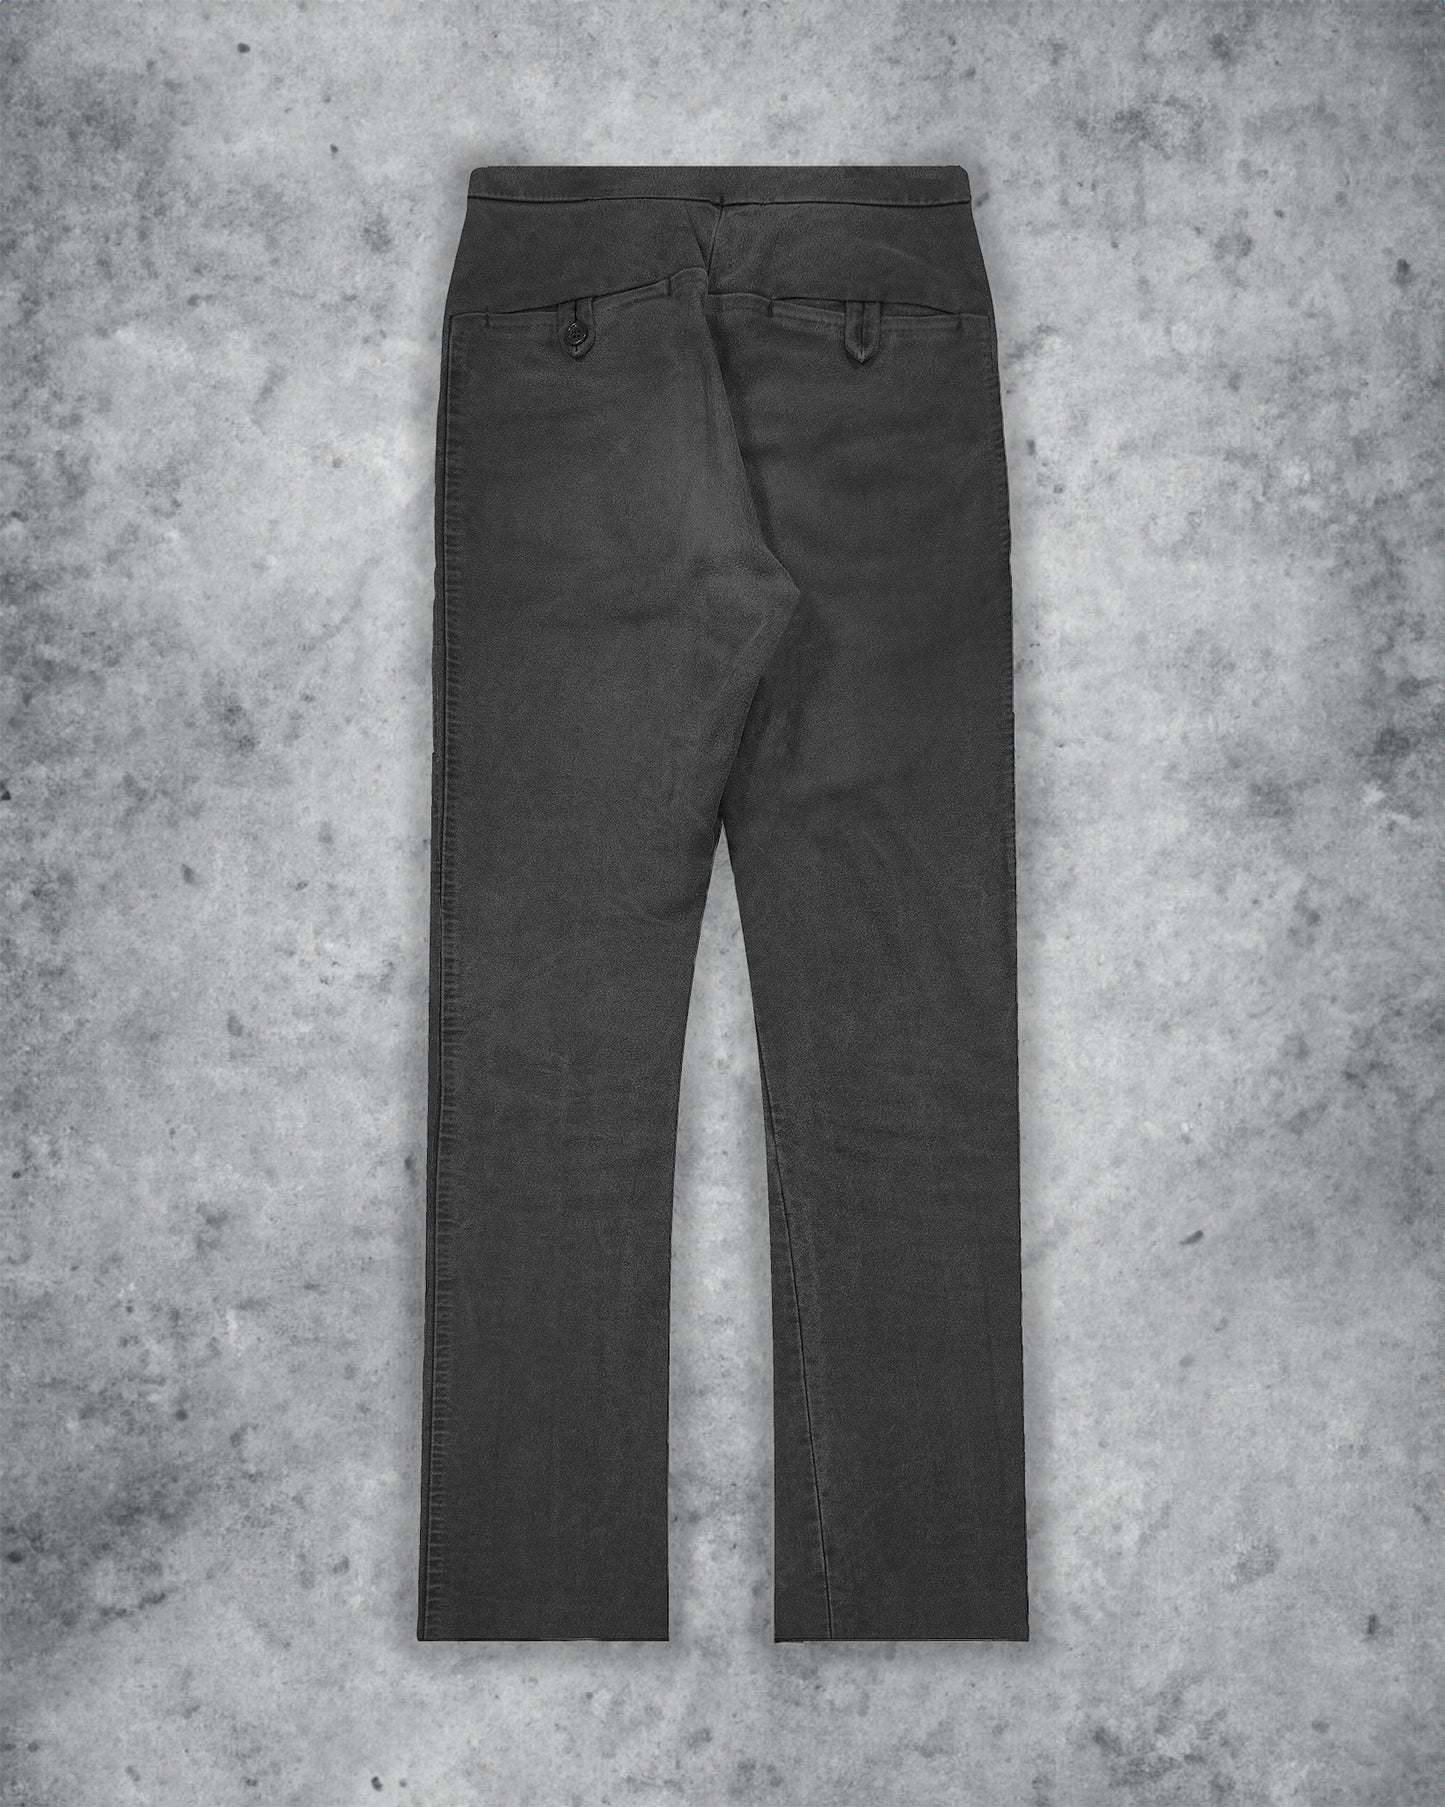 Carol Christian Poell Moleskin Double Seam Trousers - AW99 "Form-Material-Color"